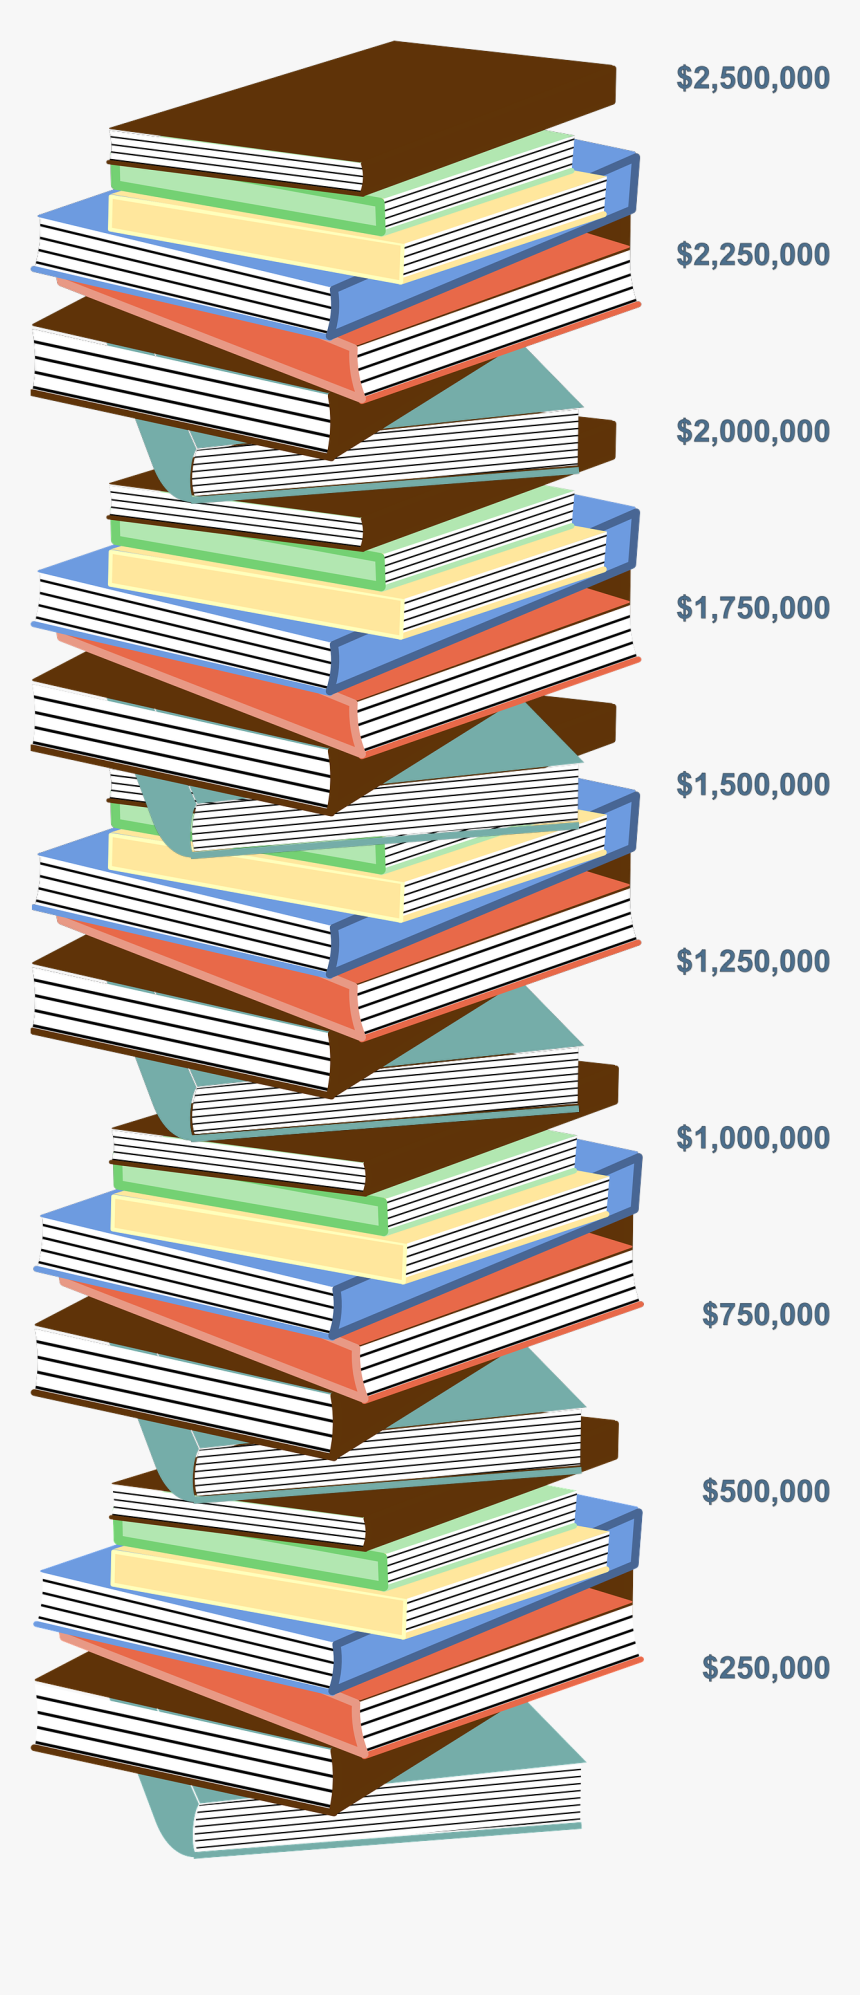 Book Stack Image Showing Final T